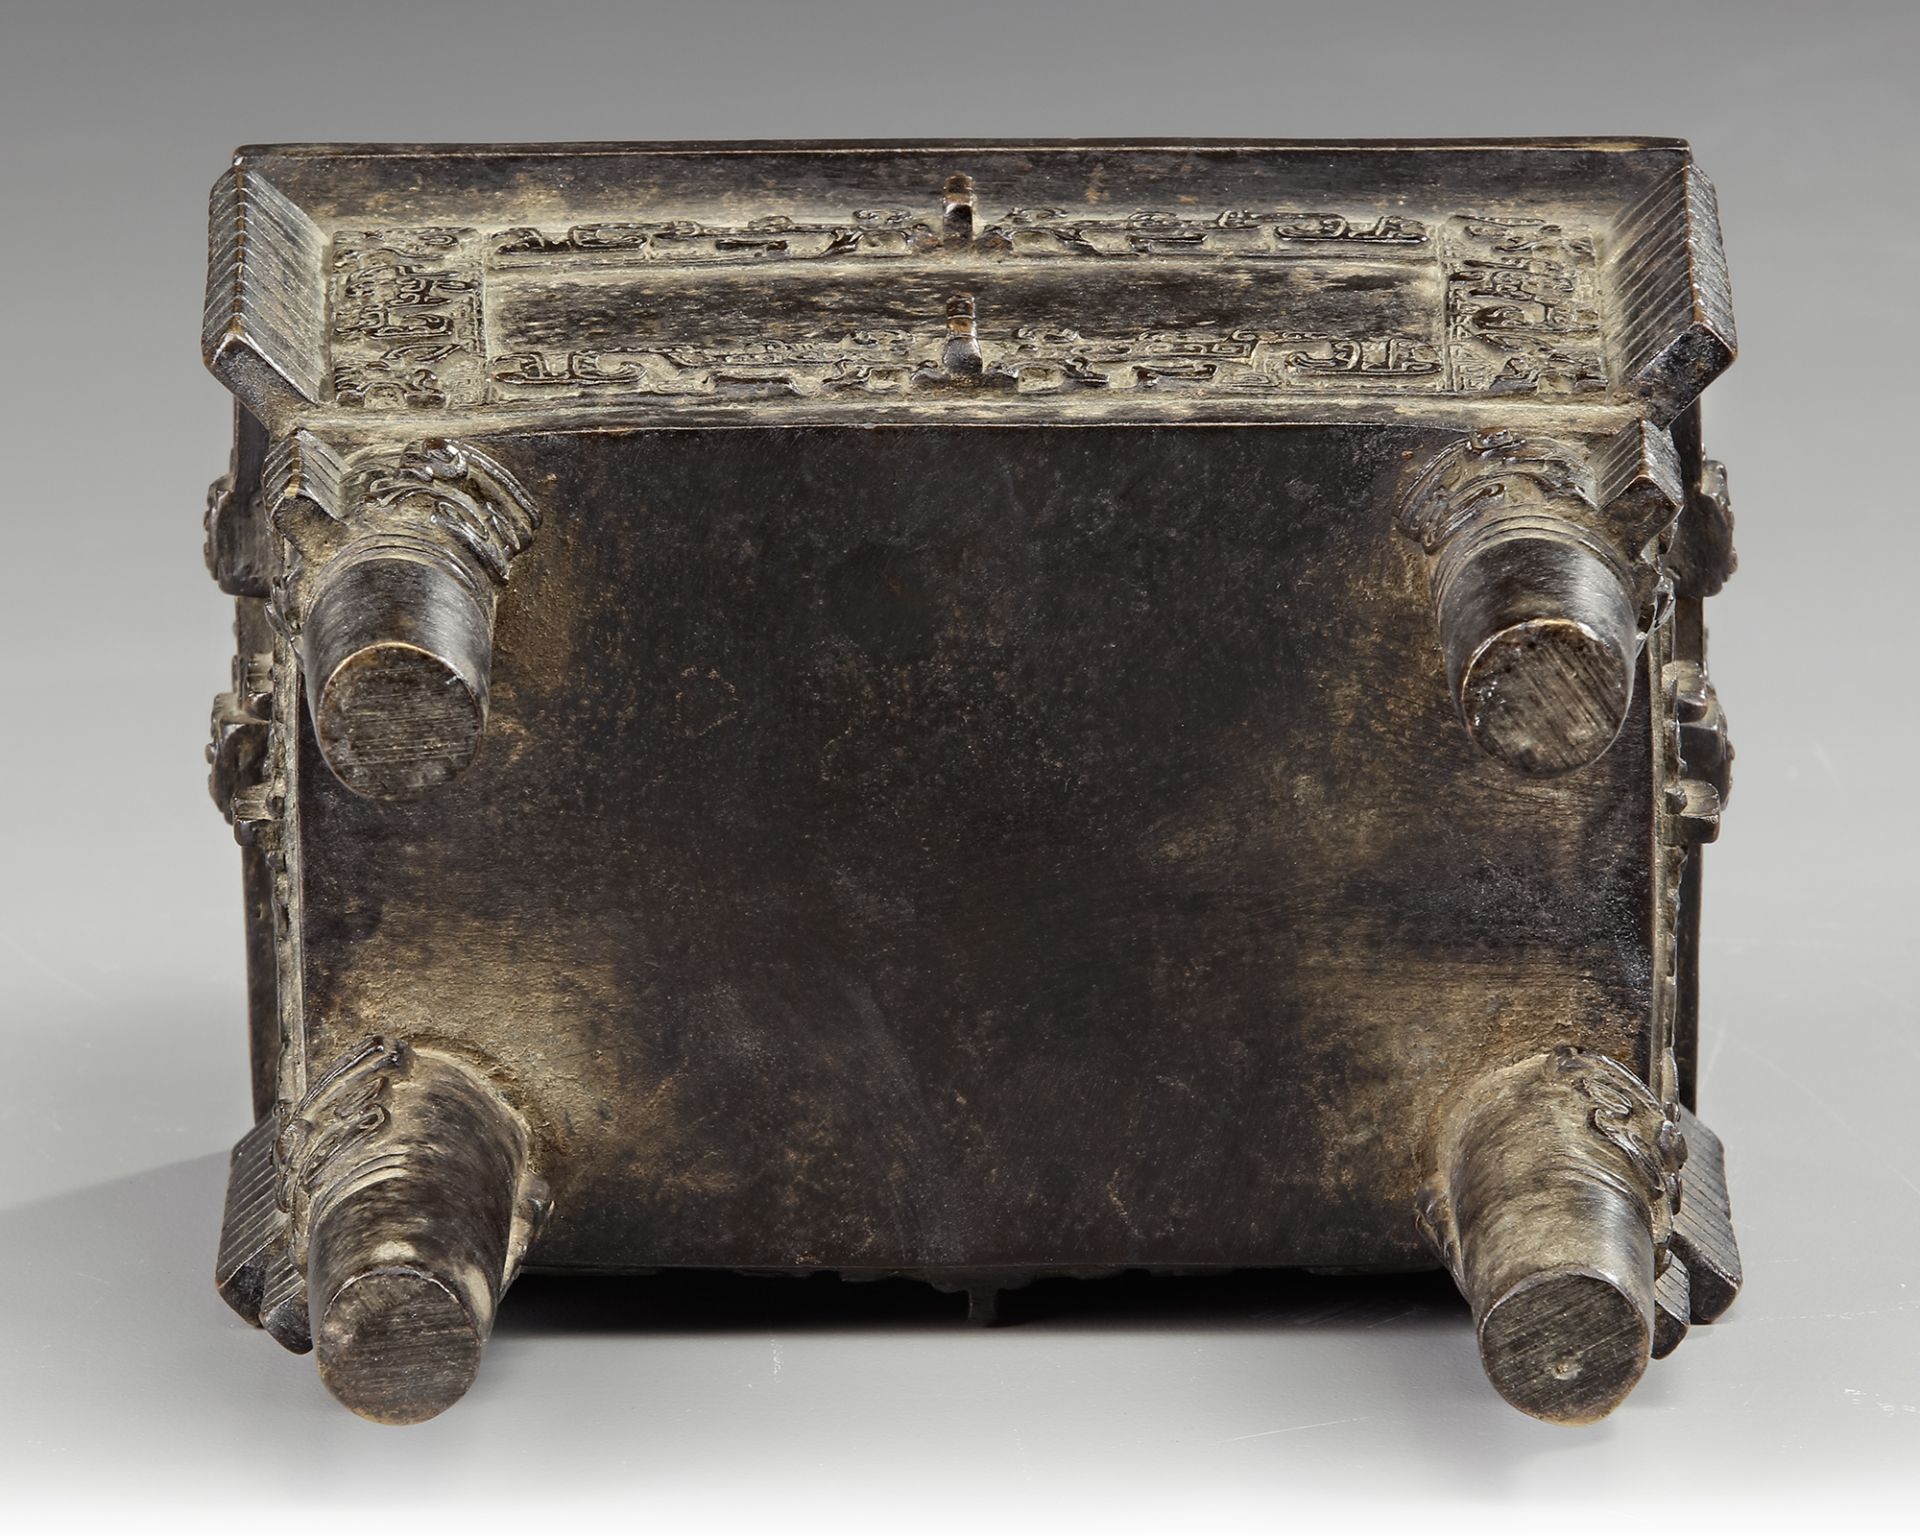 A CHINESE BRONZE CENSER, MING DYNASTY (1368-1644) - Image 5 of 5